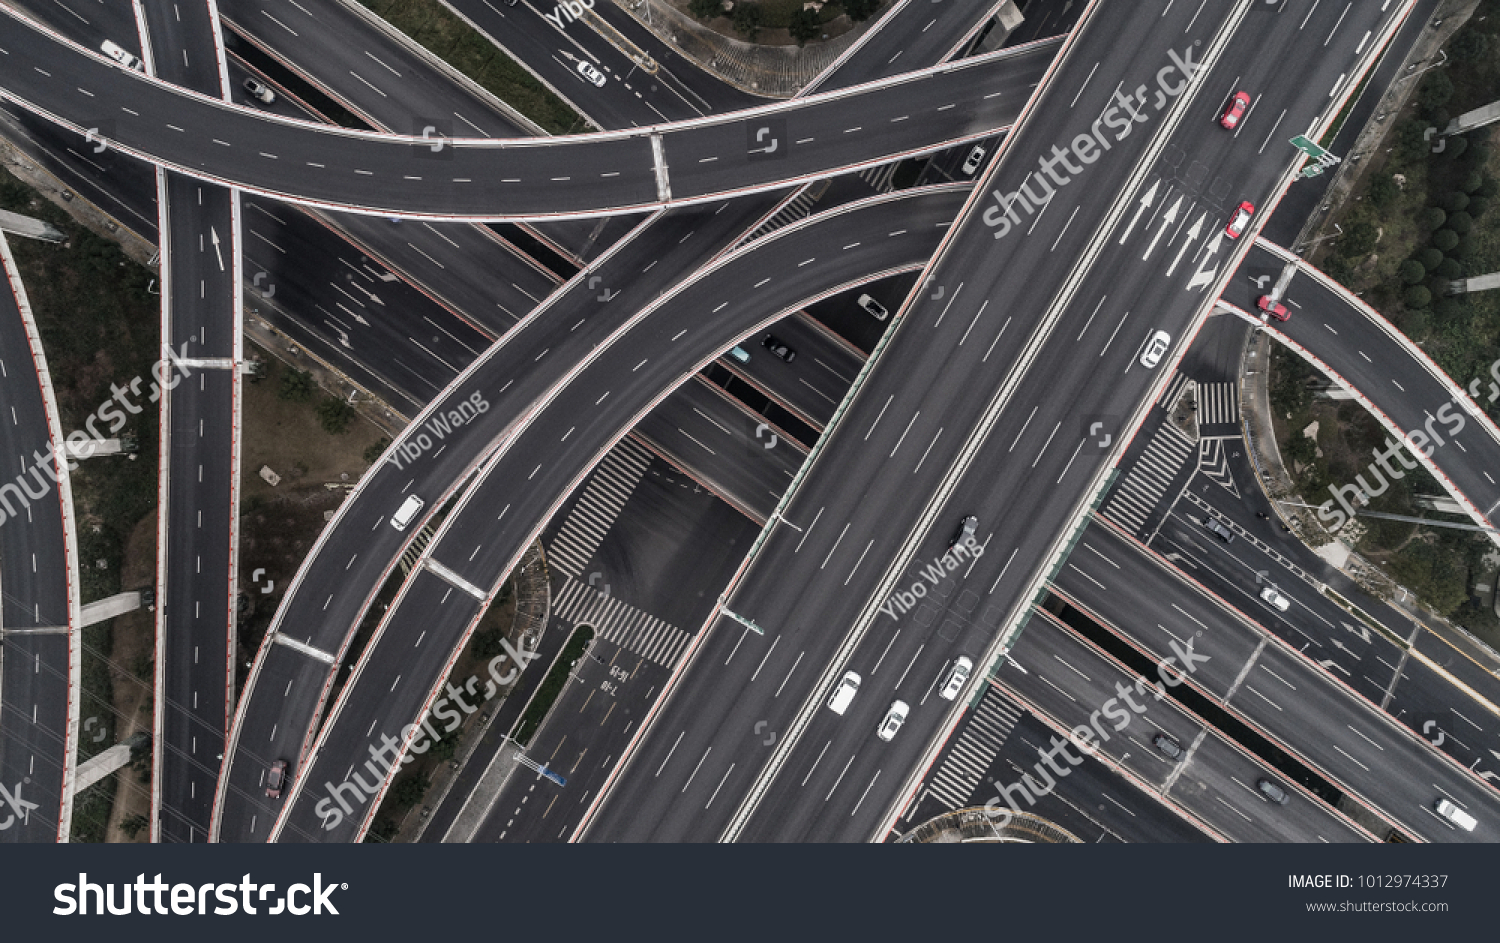 Aerial view of highway and overpass in city on a cloudy day #1012974337